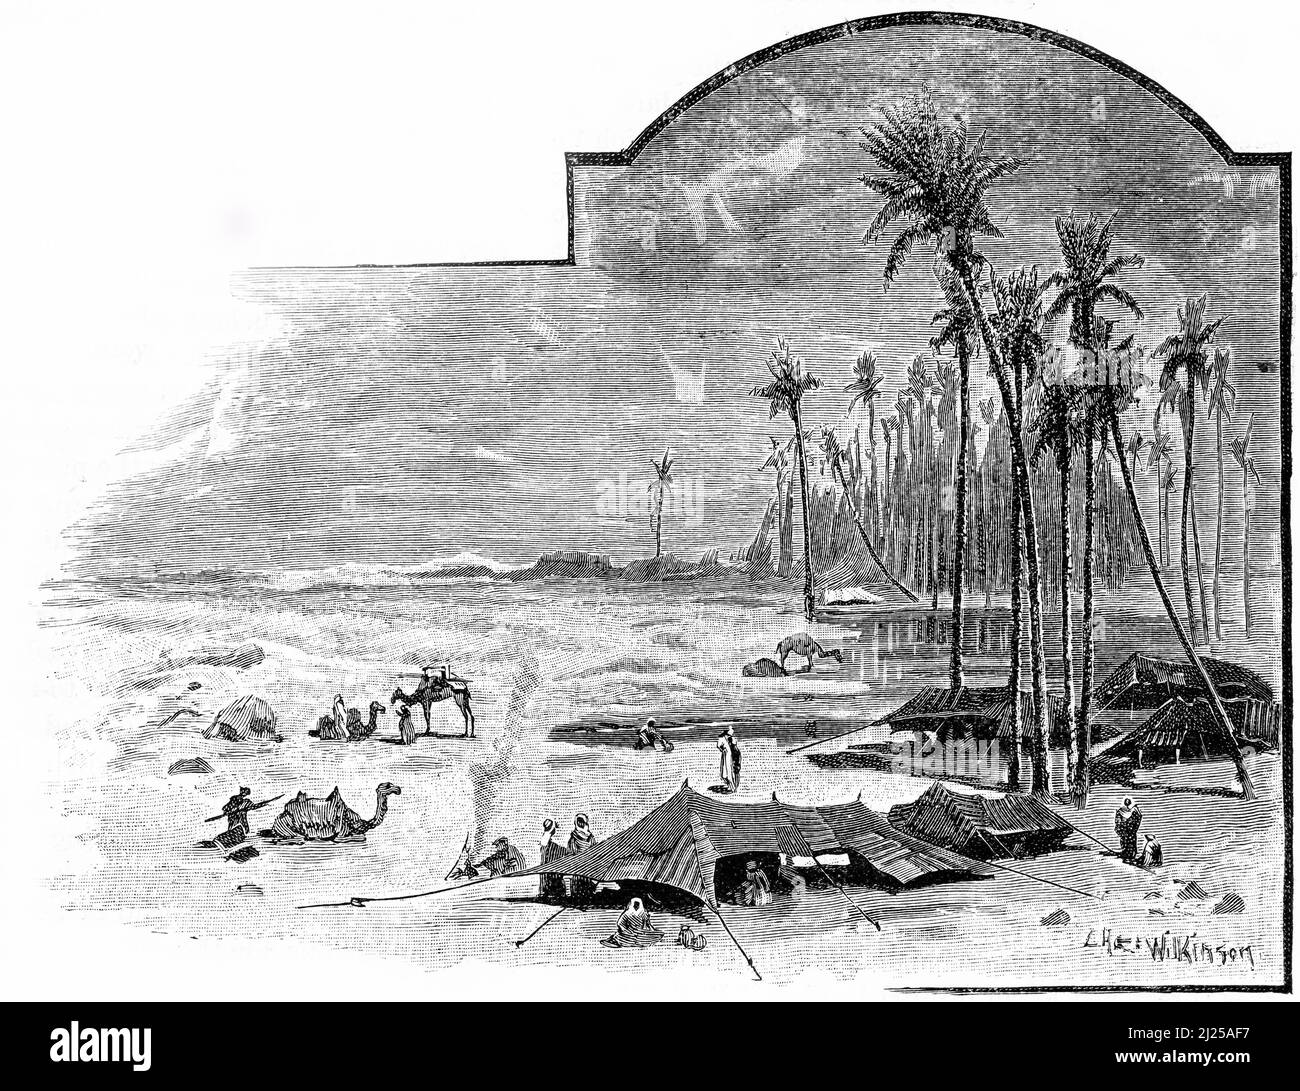 Engraving of Middle Eastern people settled in at an oasis in the desert, circa 1890 Stock Photo